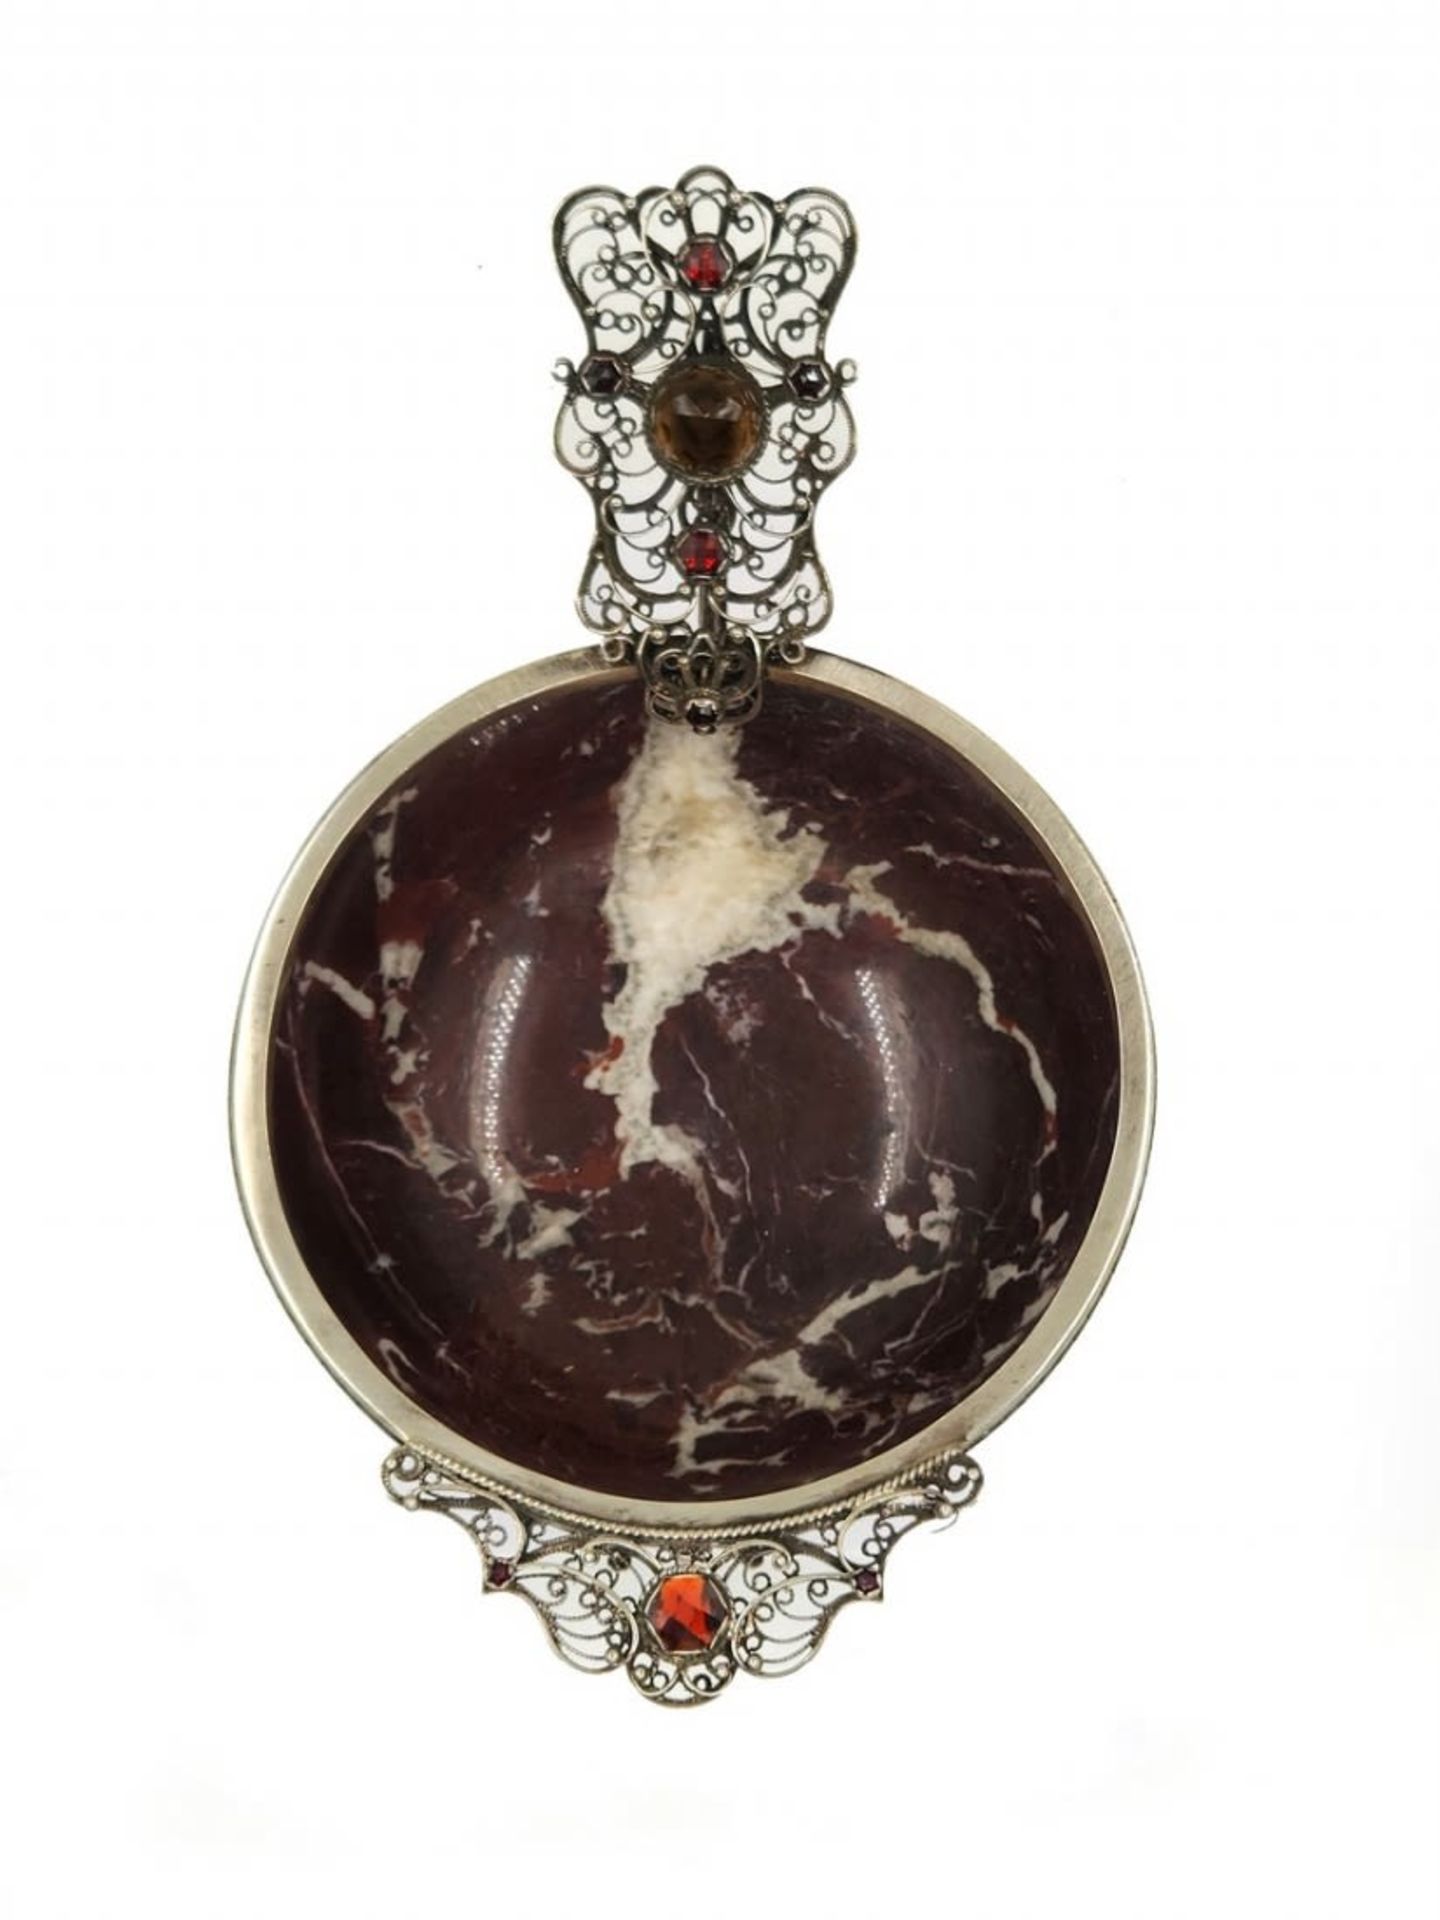 A high-quality and impressive kovsh made of Russo Levanto marble and sterling silver (925), - Image 8 of 10